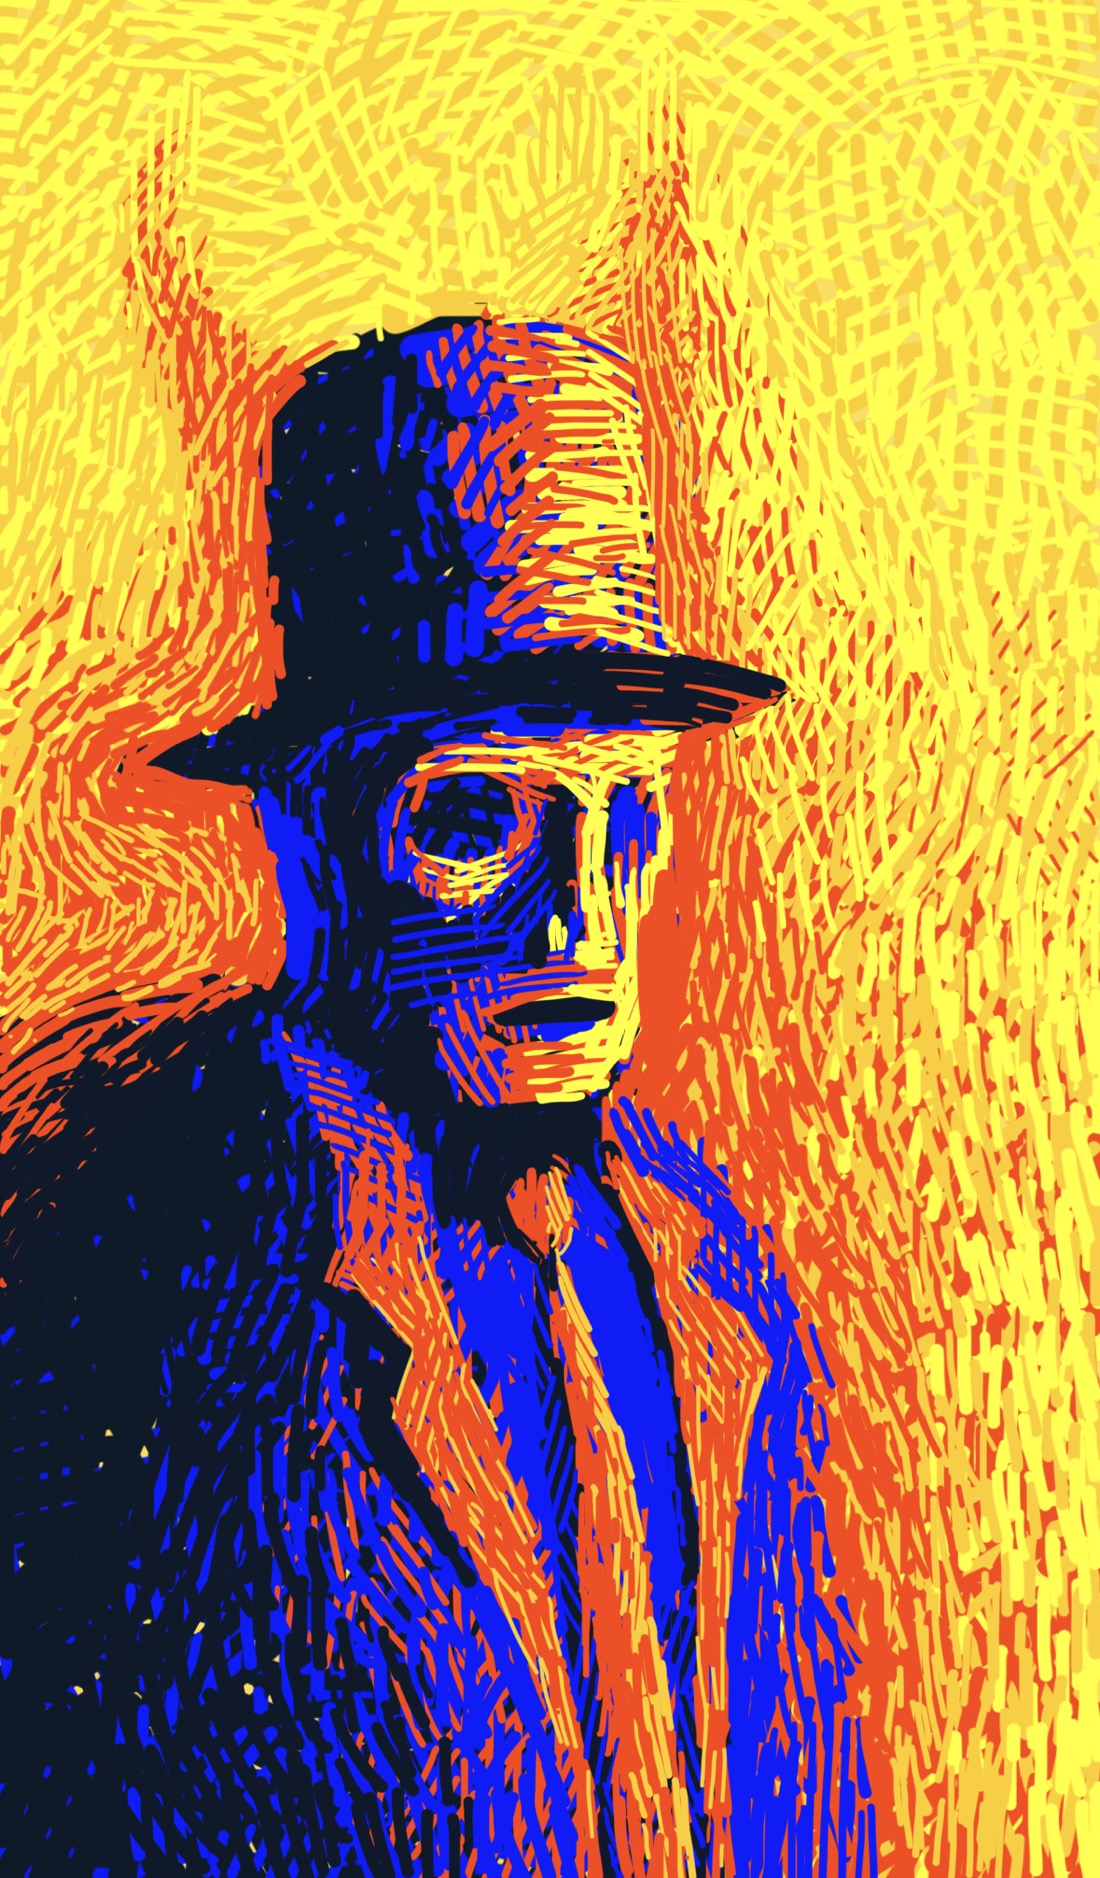 An eerie figure with sunken cheeks and hollow eyes. The figure is wearing a top hat, and a coat with a tie. The background is blazing yellow, as if illuminated by firelight. The figure is casting a red shadow against the background; a shadow with two horns.